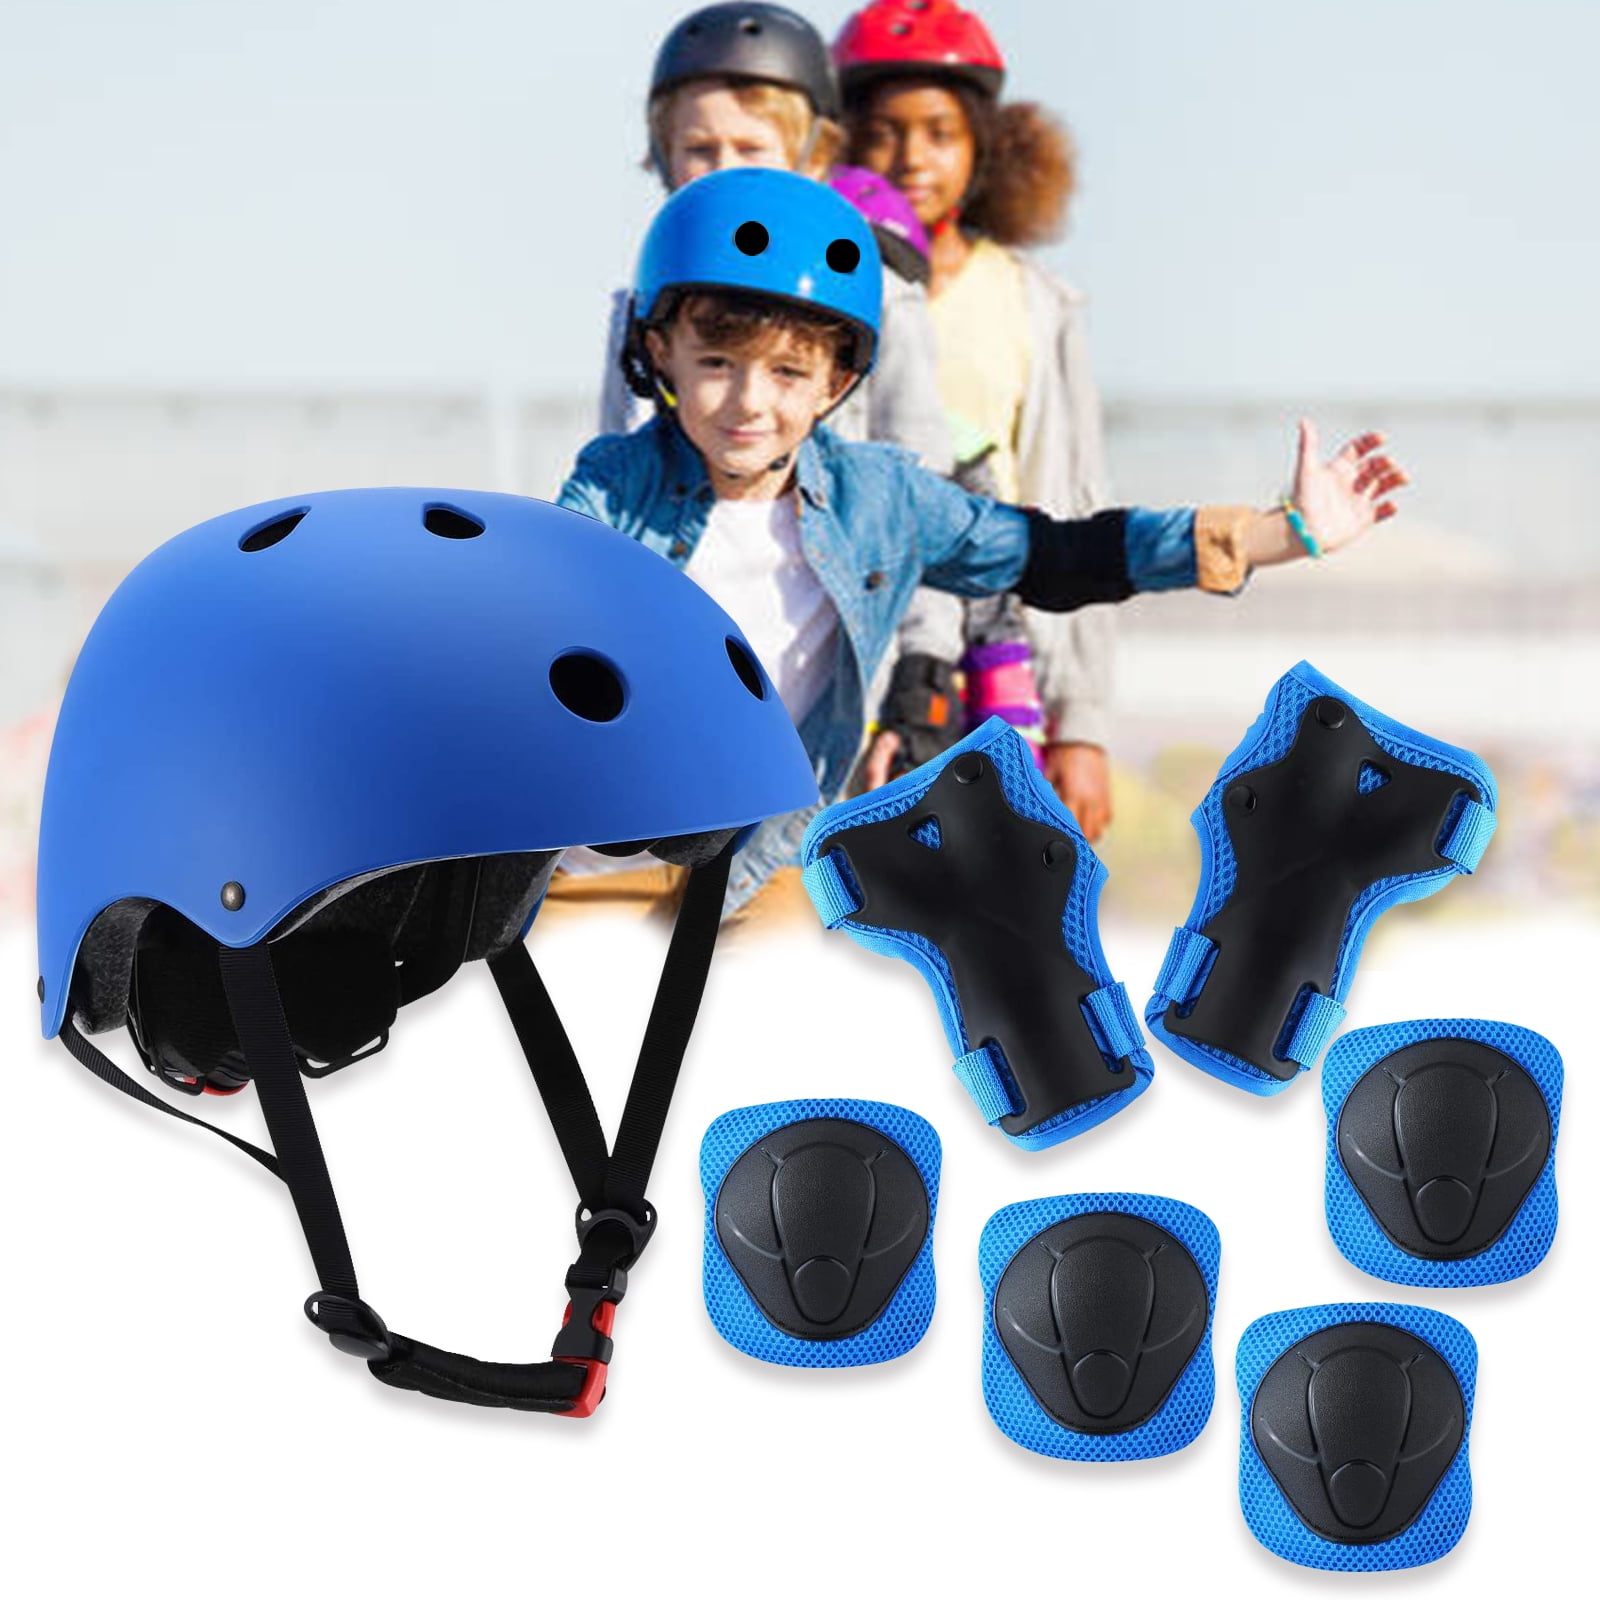 Apark Kids Bike Helmet Protective Gear Set Age 3-8 Years Knee Pads Elbow Pads Wrist Guards and Adjustable Skateboard Helmets for Scooter Cycling Roller Skating Boys Girls 